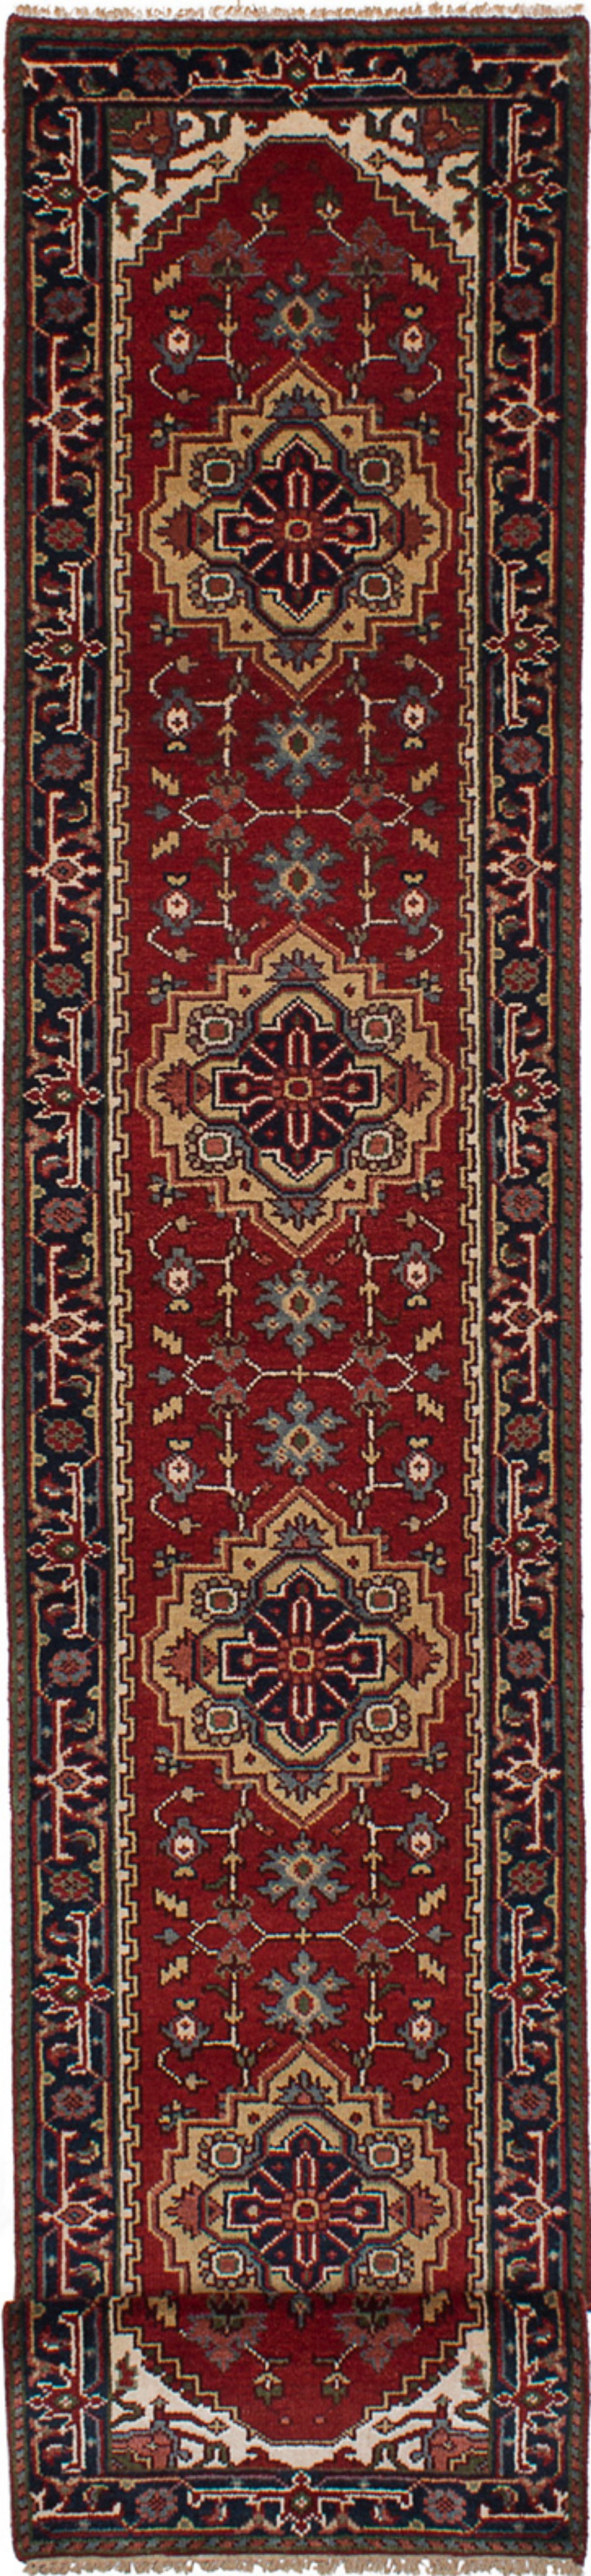 Hand-knotted Serapi Heritage Red Wool Rug 2'7" x 19'10"  Size: 2'7" x 19'10"  